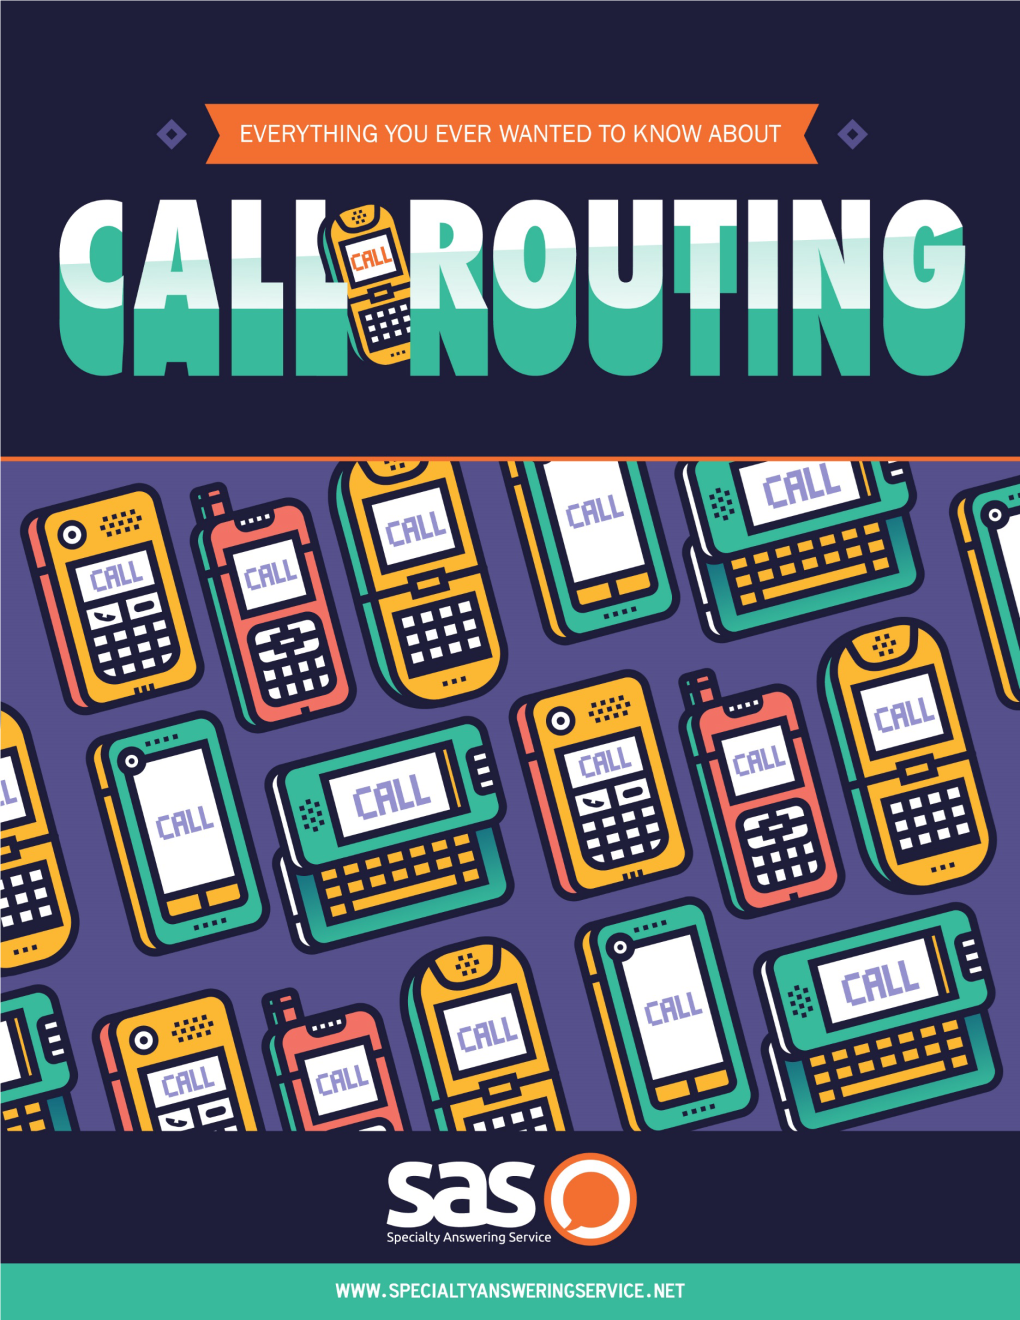 Learn About Call Routing